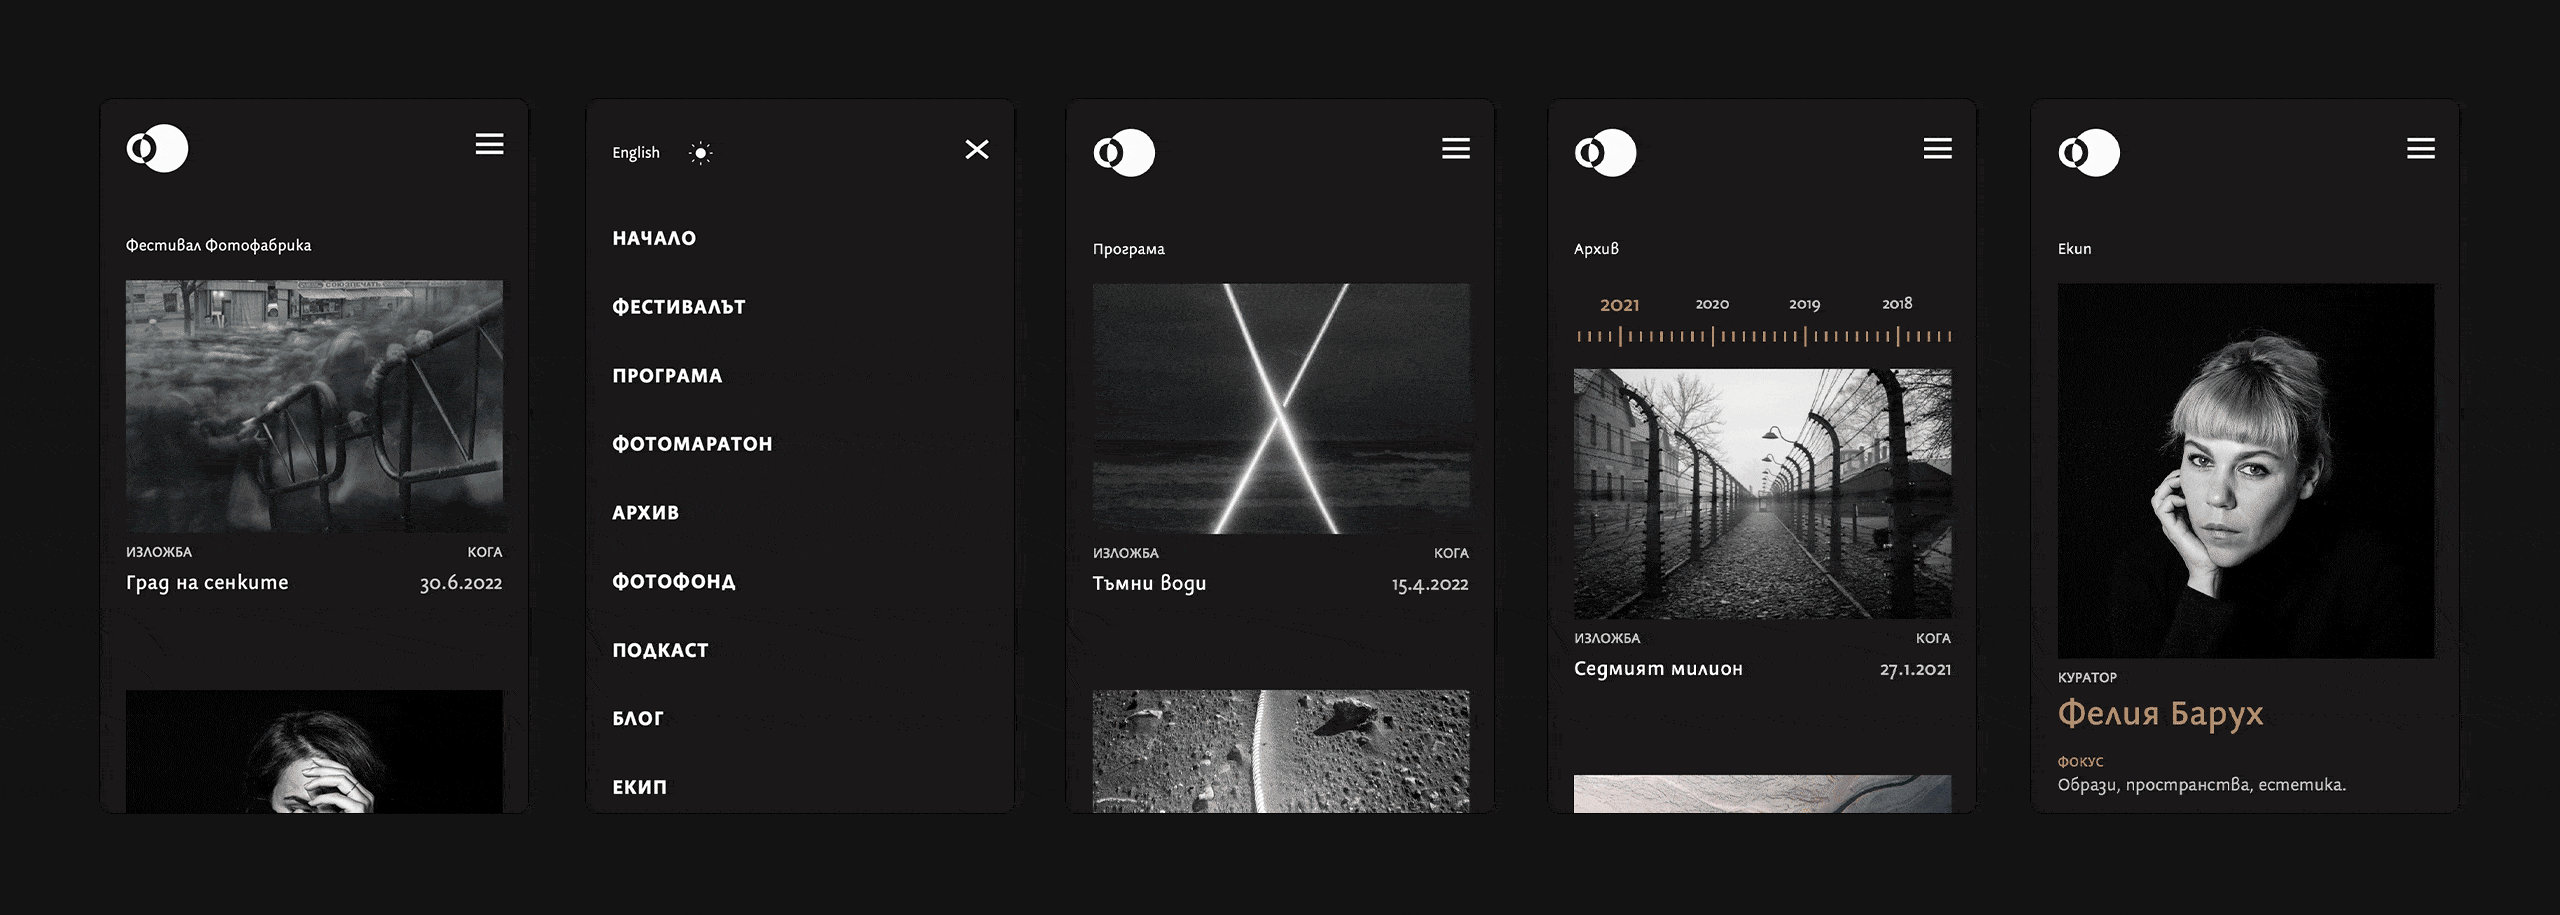 Fotofabrika website pages on mobile dark theme